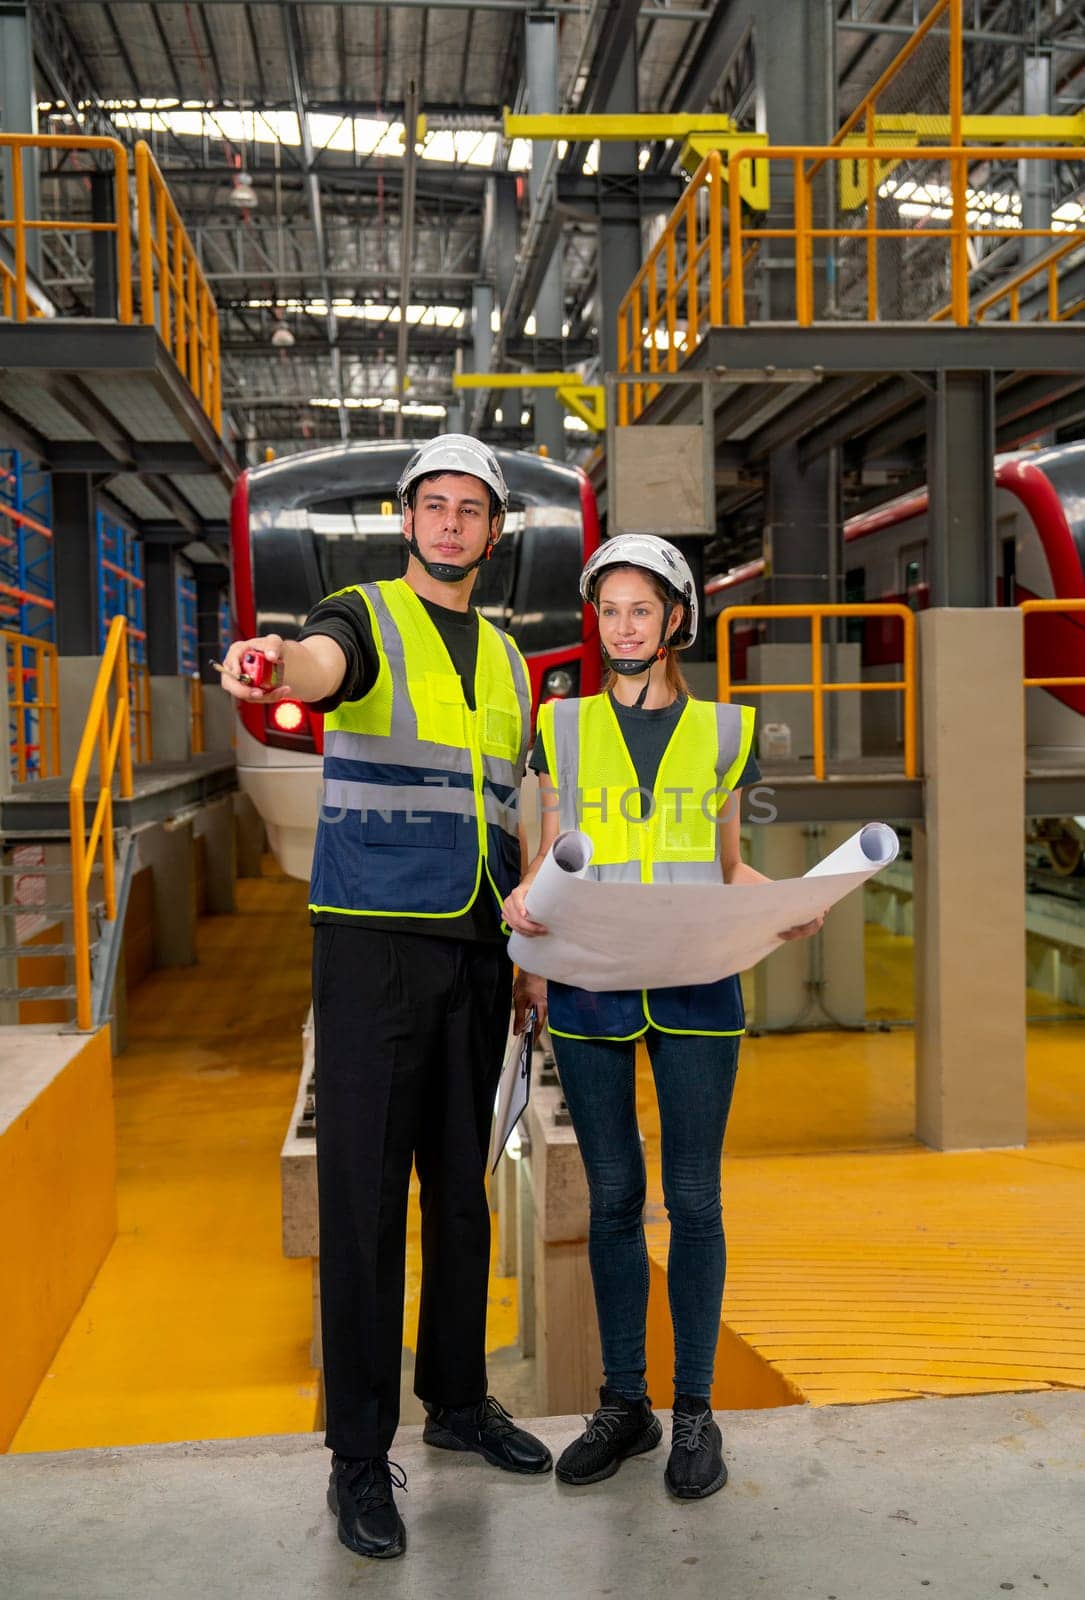 Verital image of two professional engineer or technician workers man and woman discuss with drawing paper and the man point to left side also stay in front of electric train in factory workplace.